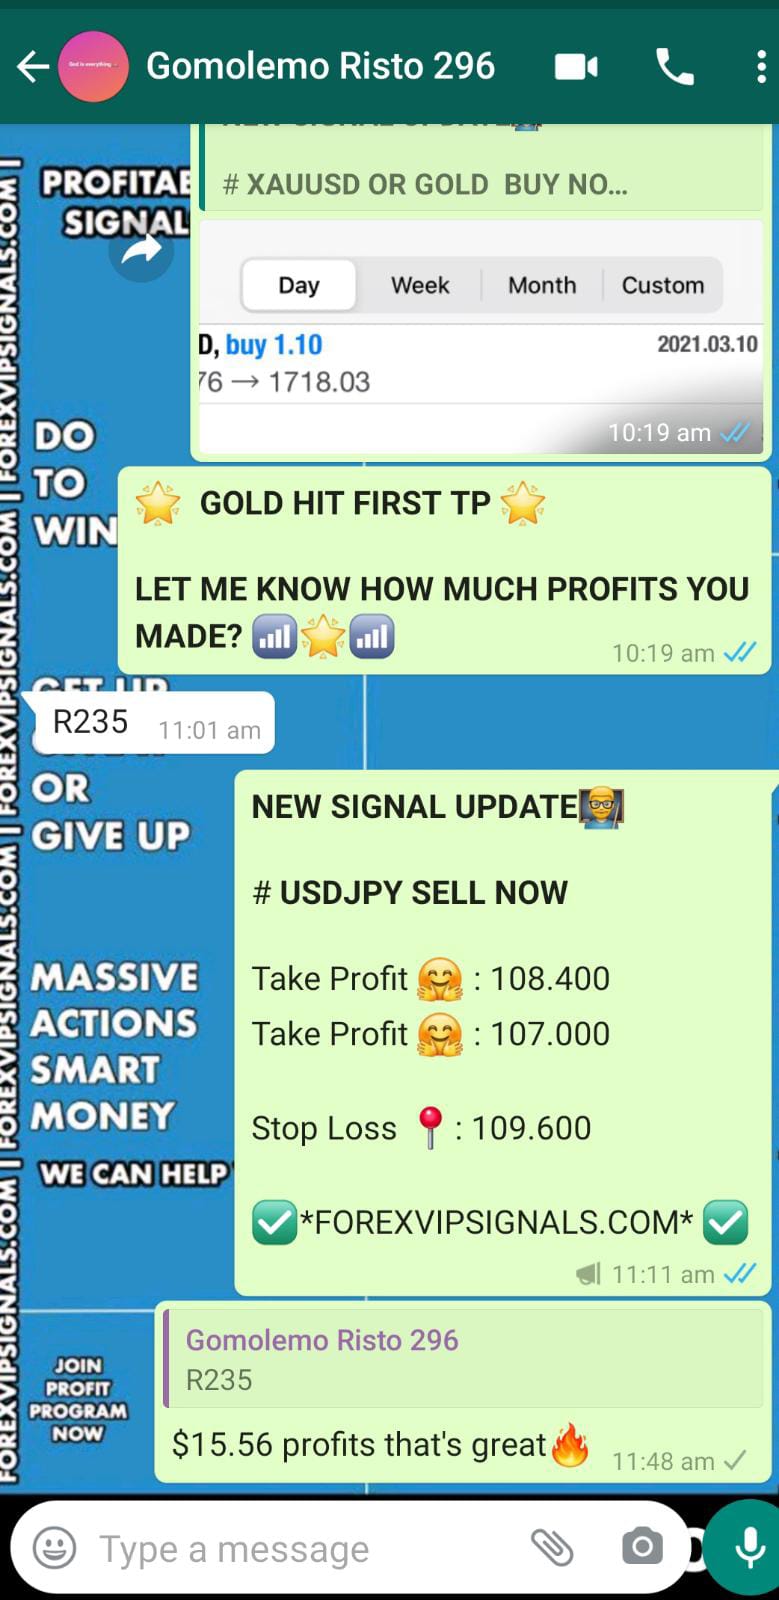 vip signals with forex vip signals